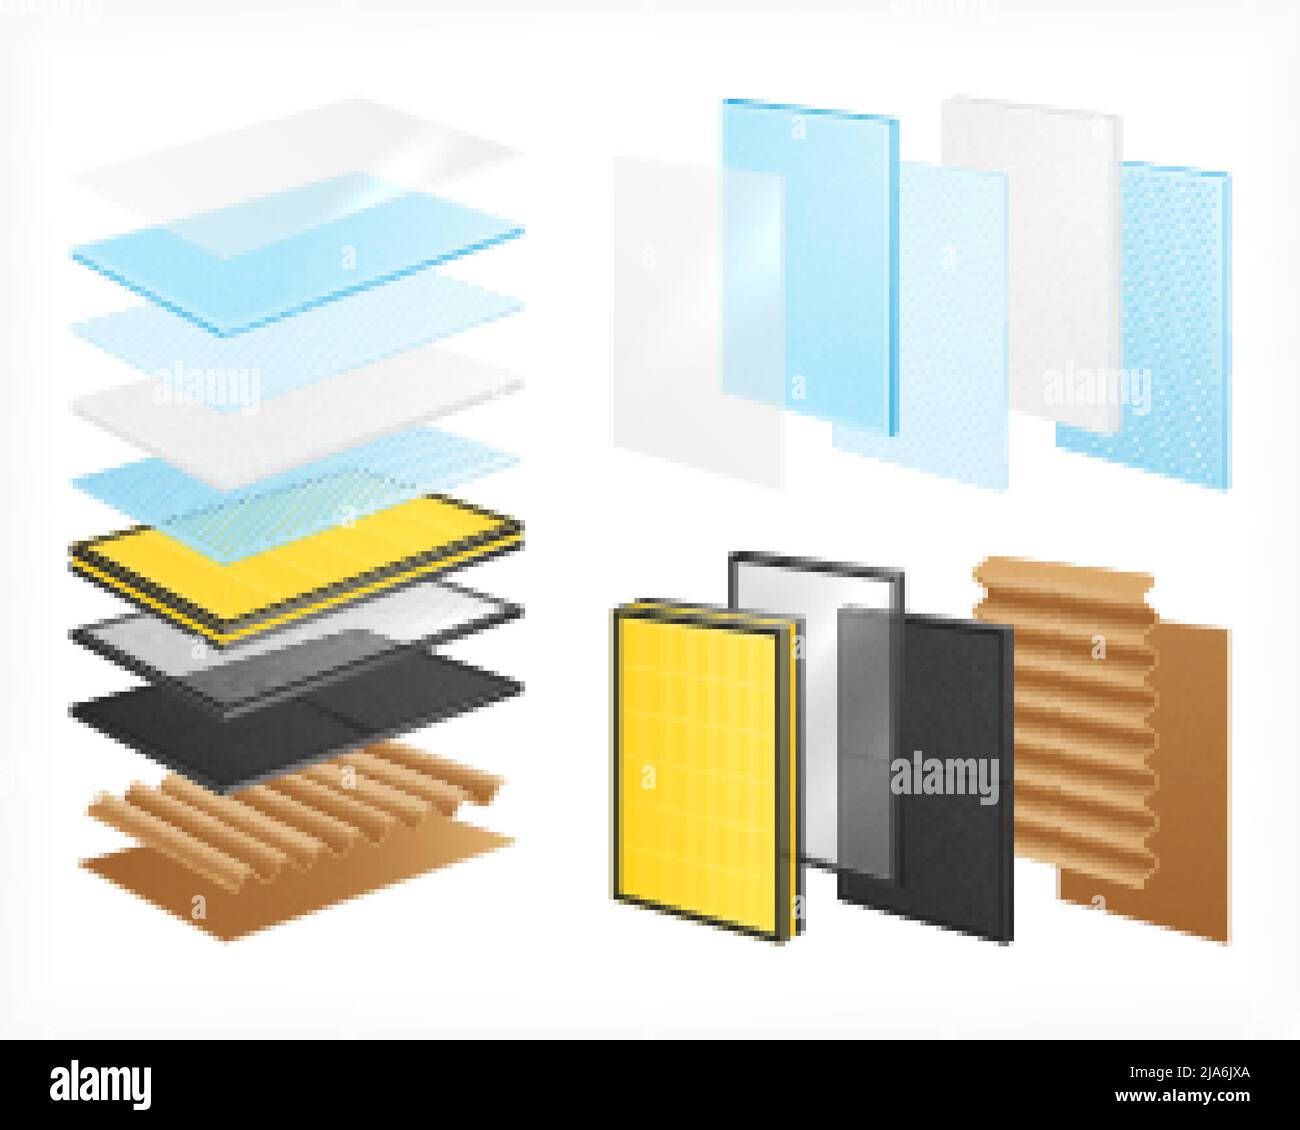 Layered materials realistic set with isolated images of material rows with views of single layers stacks vector illustration Stock Vector